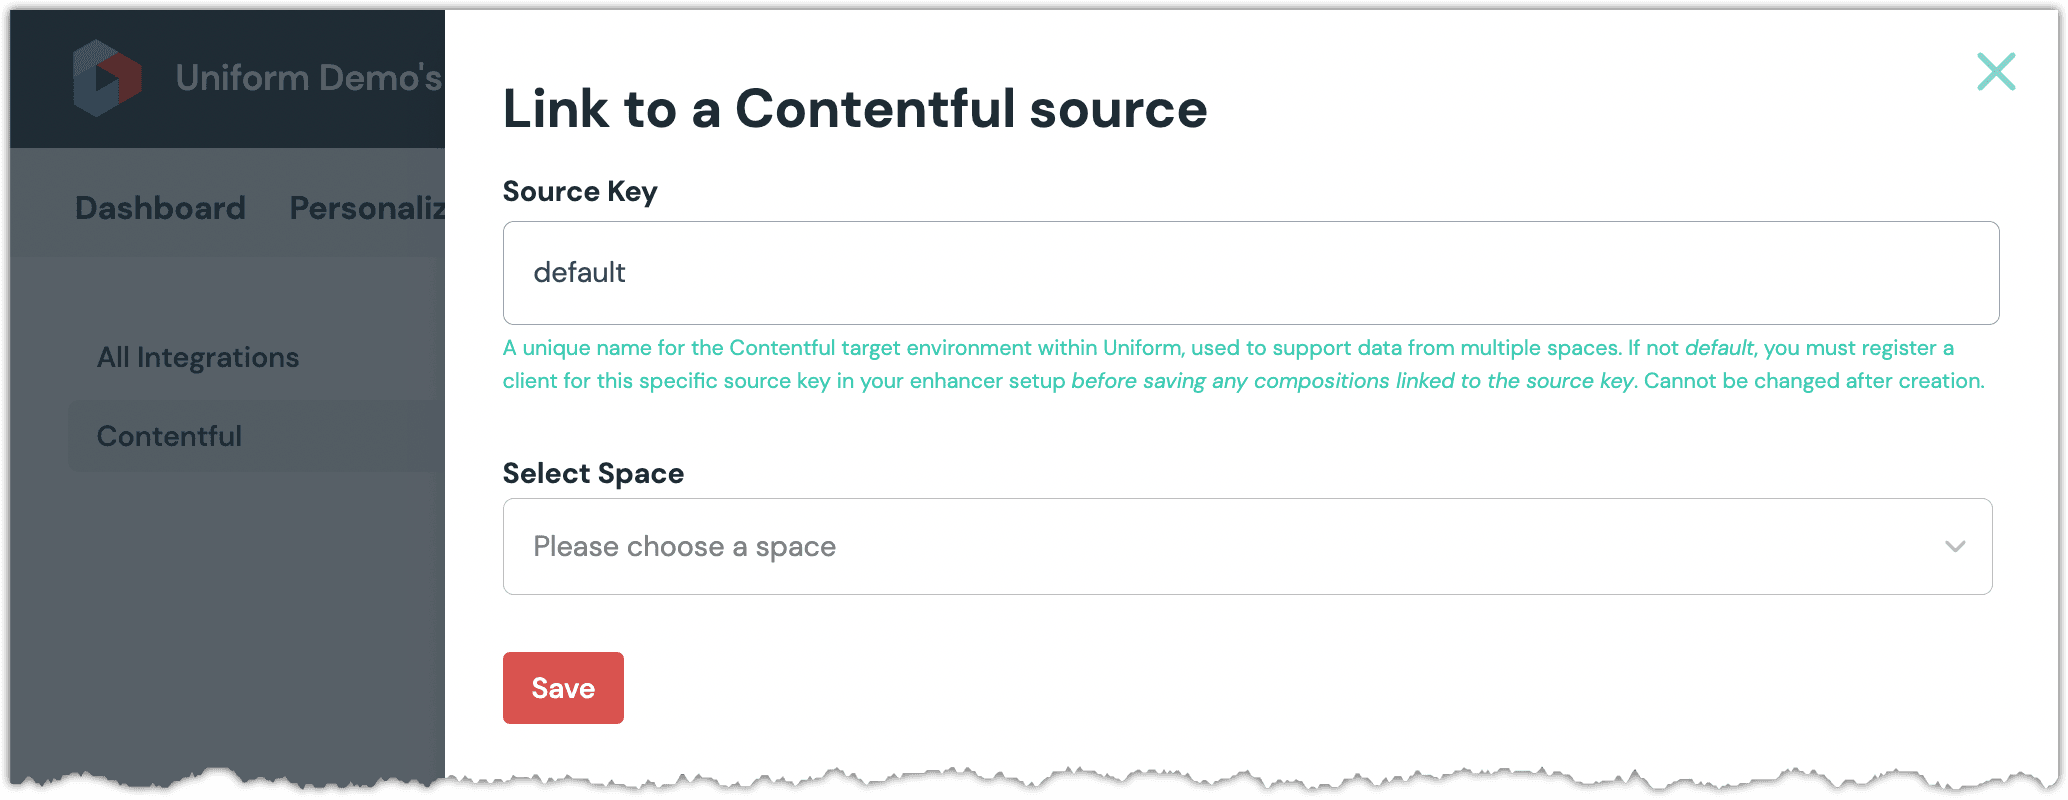 source-configuration-no-space-selected